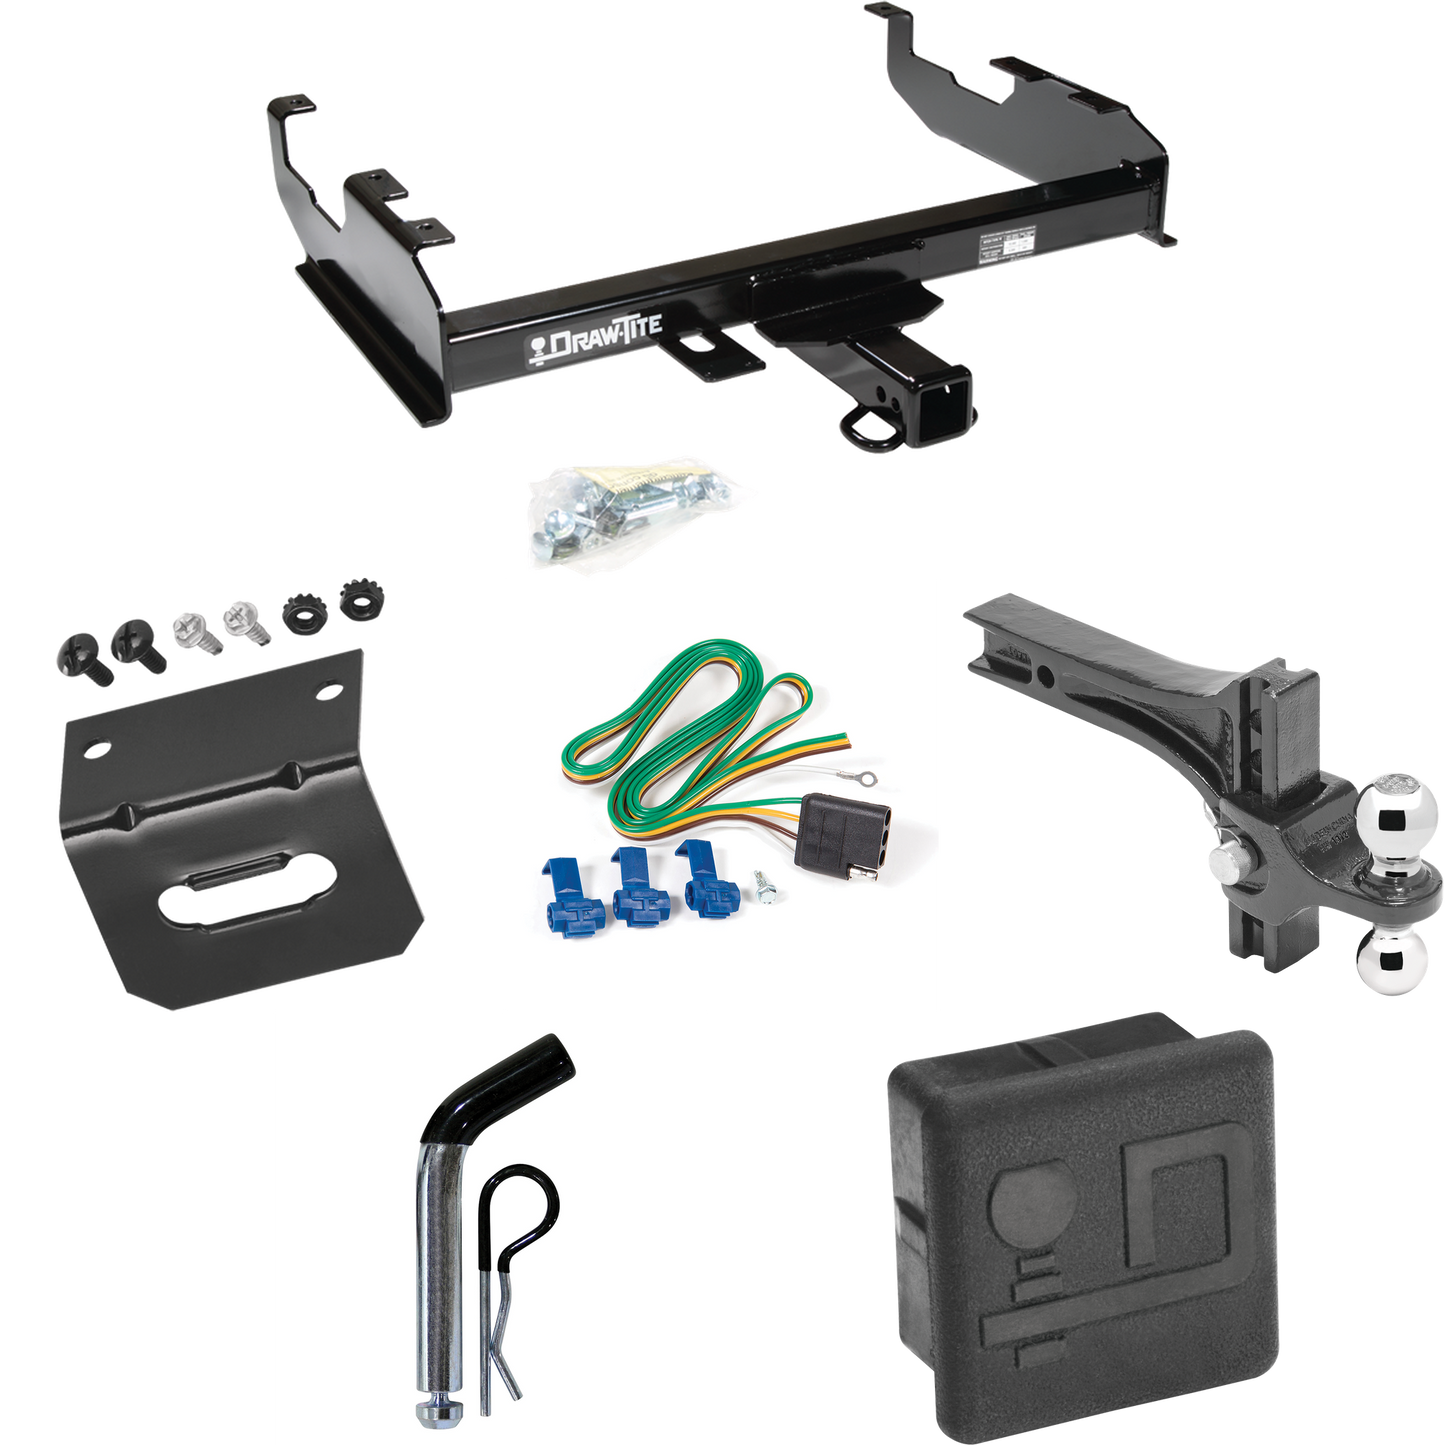 Fits 1963-1972 Chevrolet K20 Trailer Hitch Tow PKG w/ 4-Flat Wiring + Dual Adjustable Drop Rise Ball Ball Mount 2" & 2-5/16" Trailer Balls + Pin/Clip + Wiring Bracket + Hitch Cover (For w/8' Bed Models) By Draw-Tite